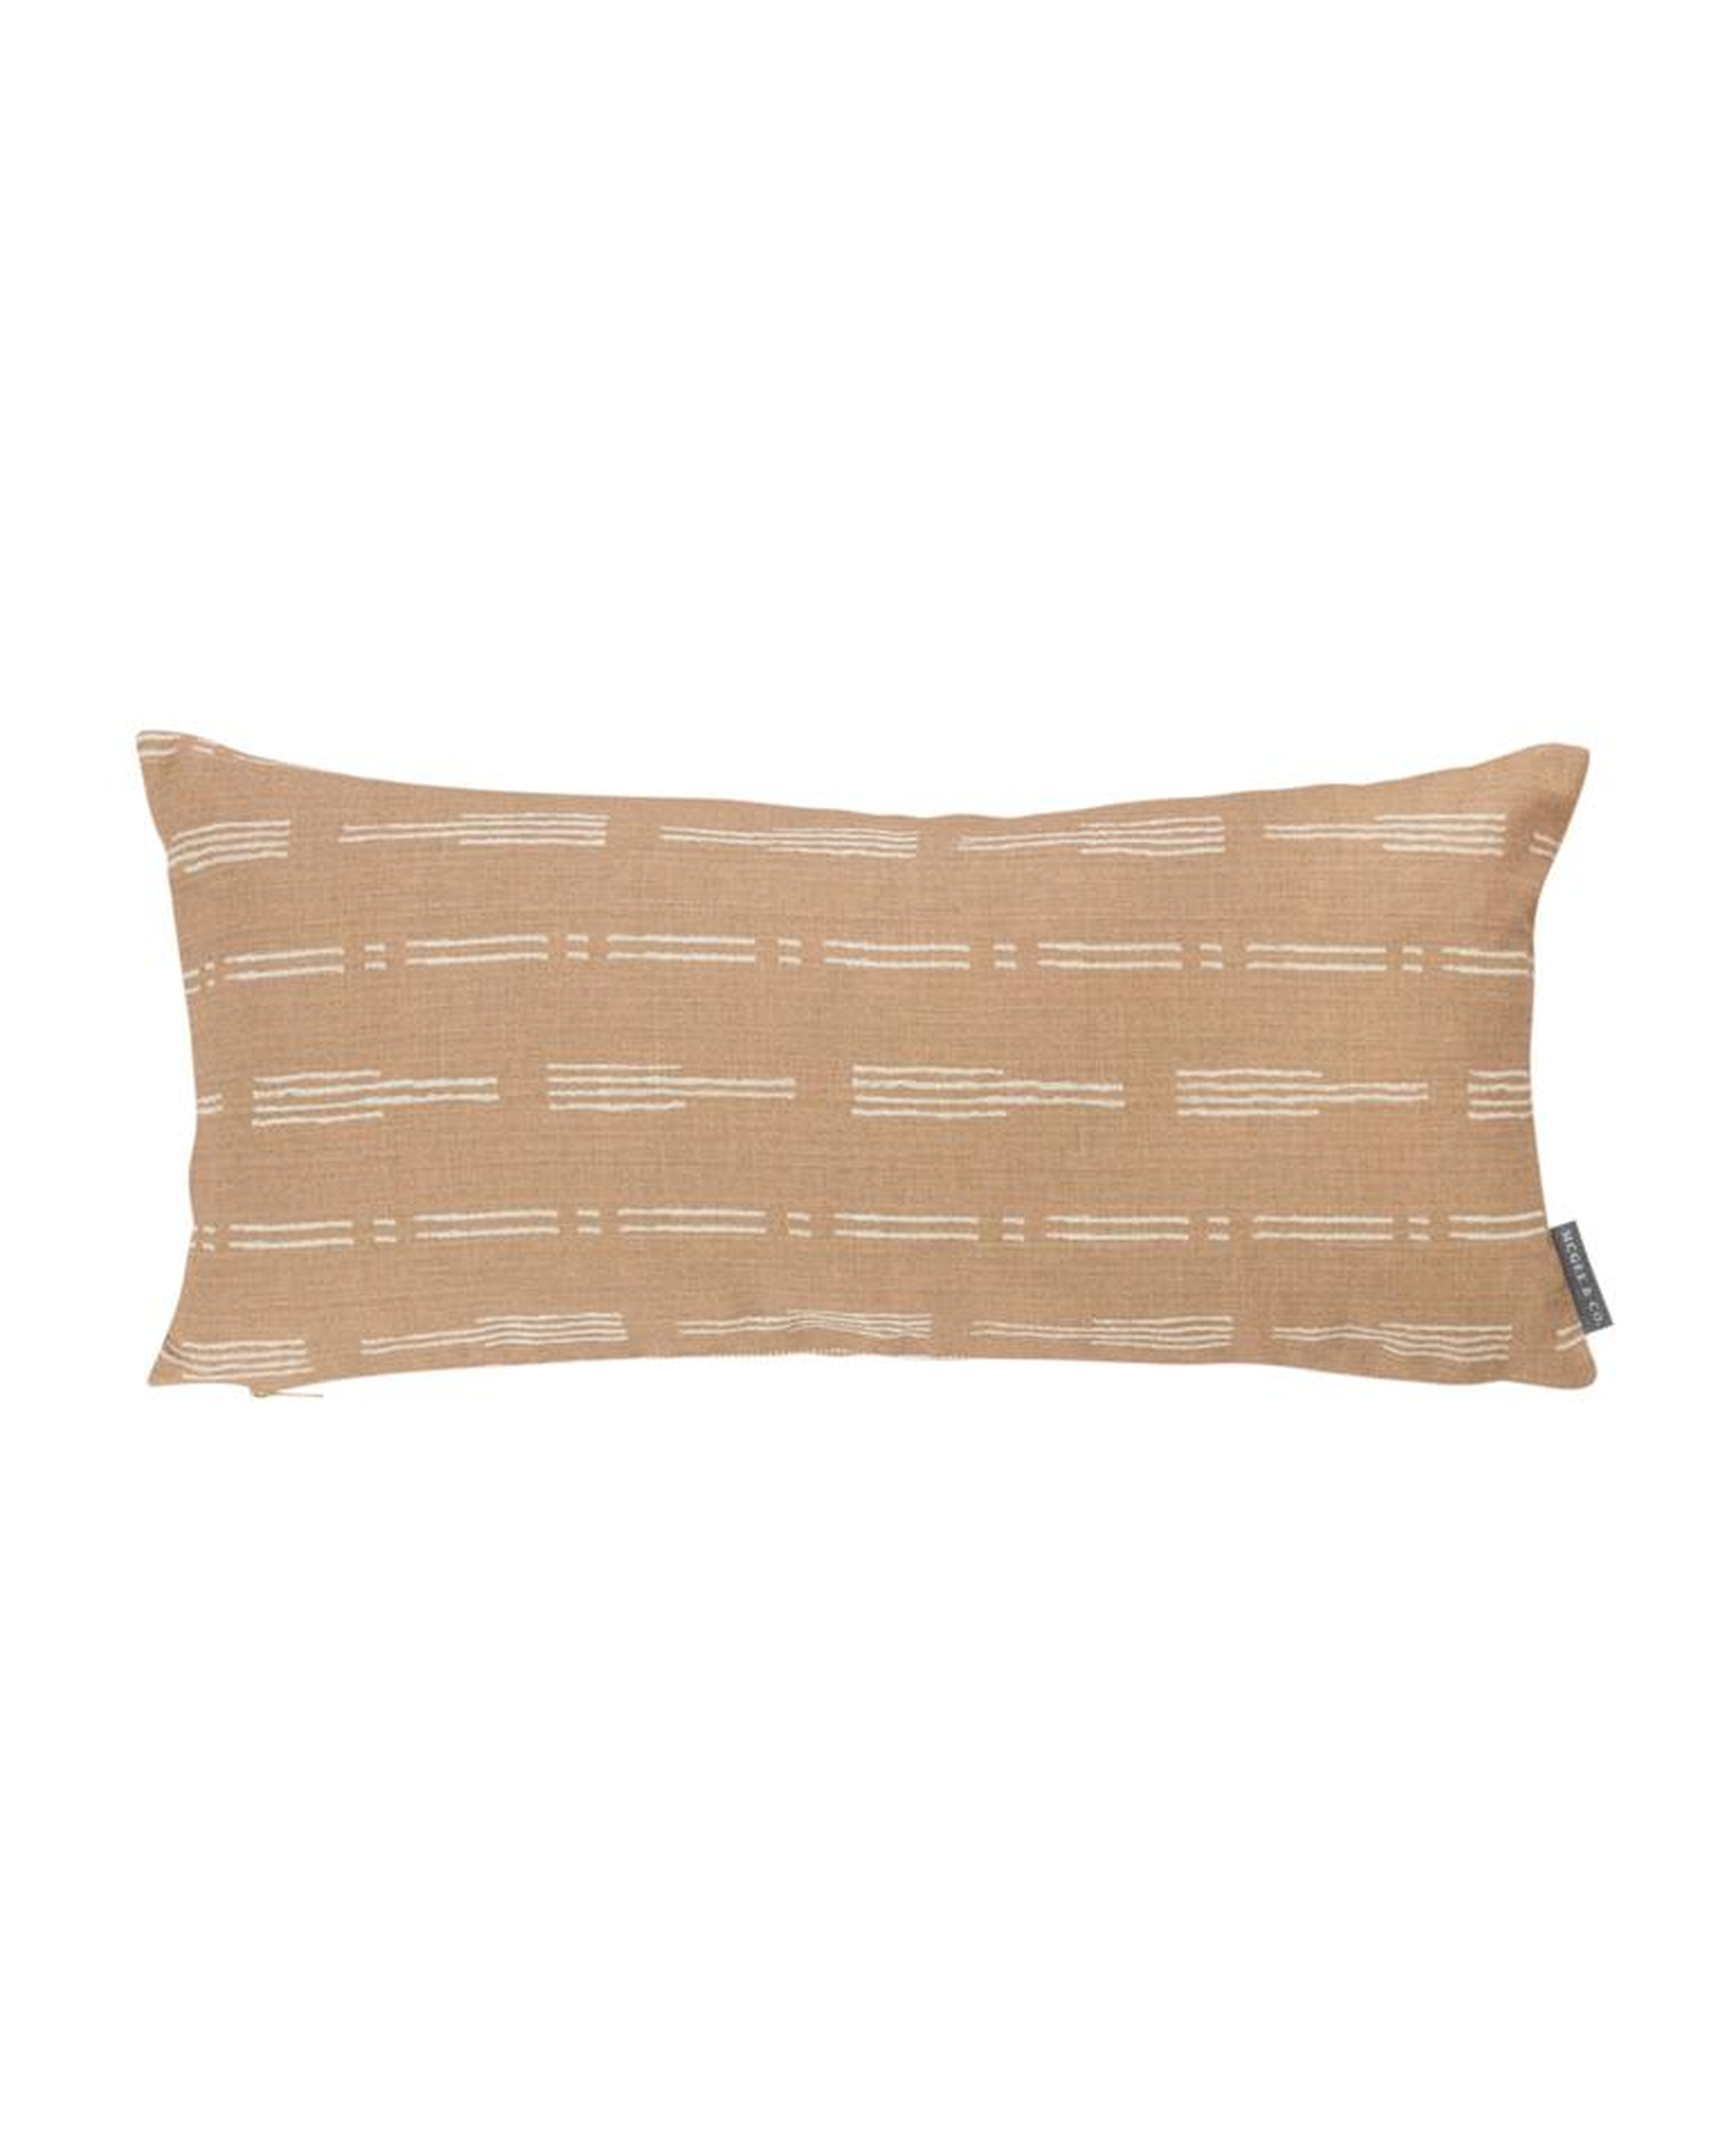 NIK BROKEN STRIPE PILLOW COVER WITHOUT INSERT - McGee & Co.